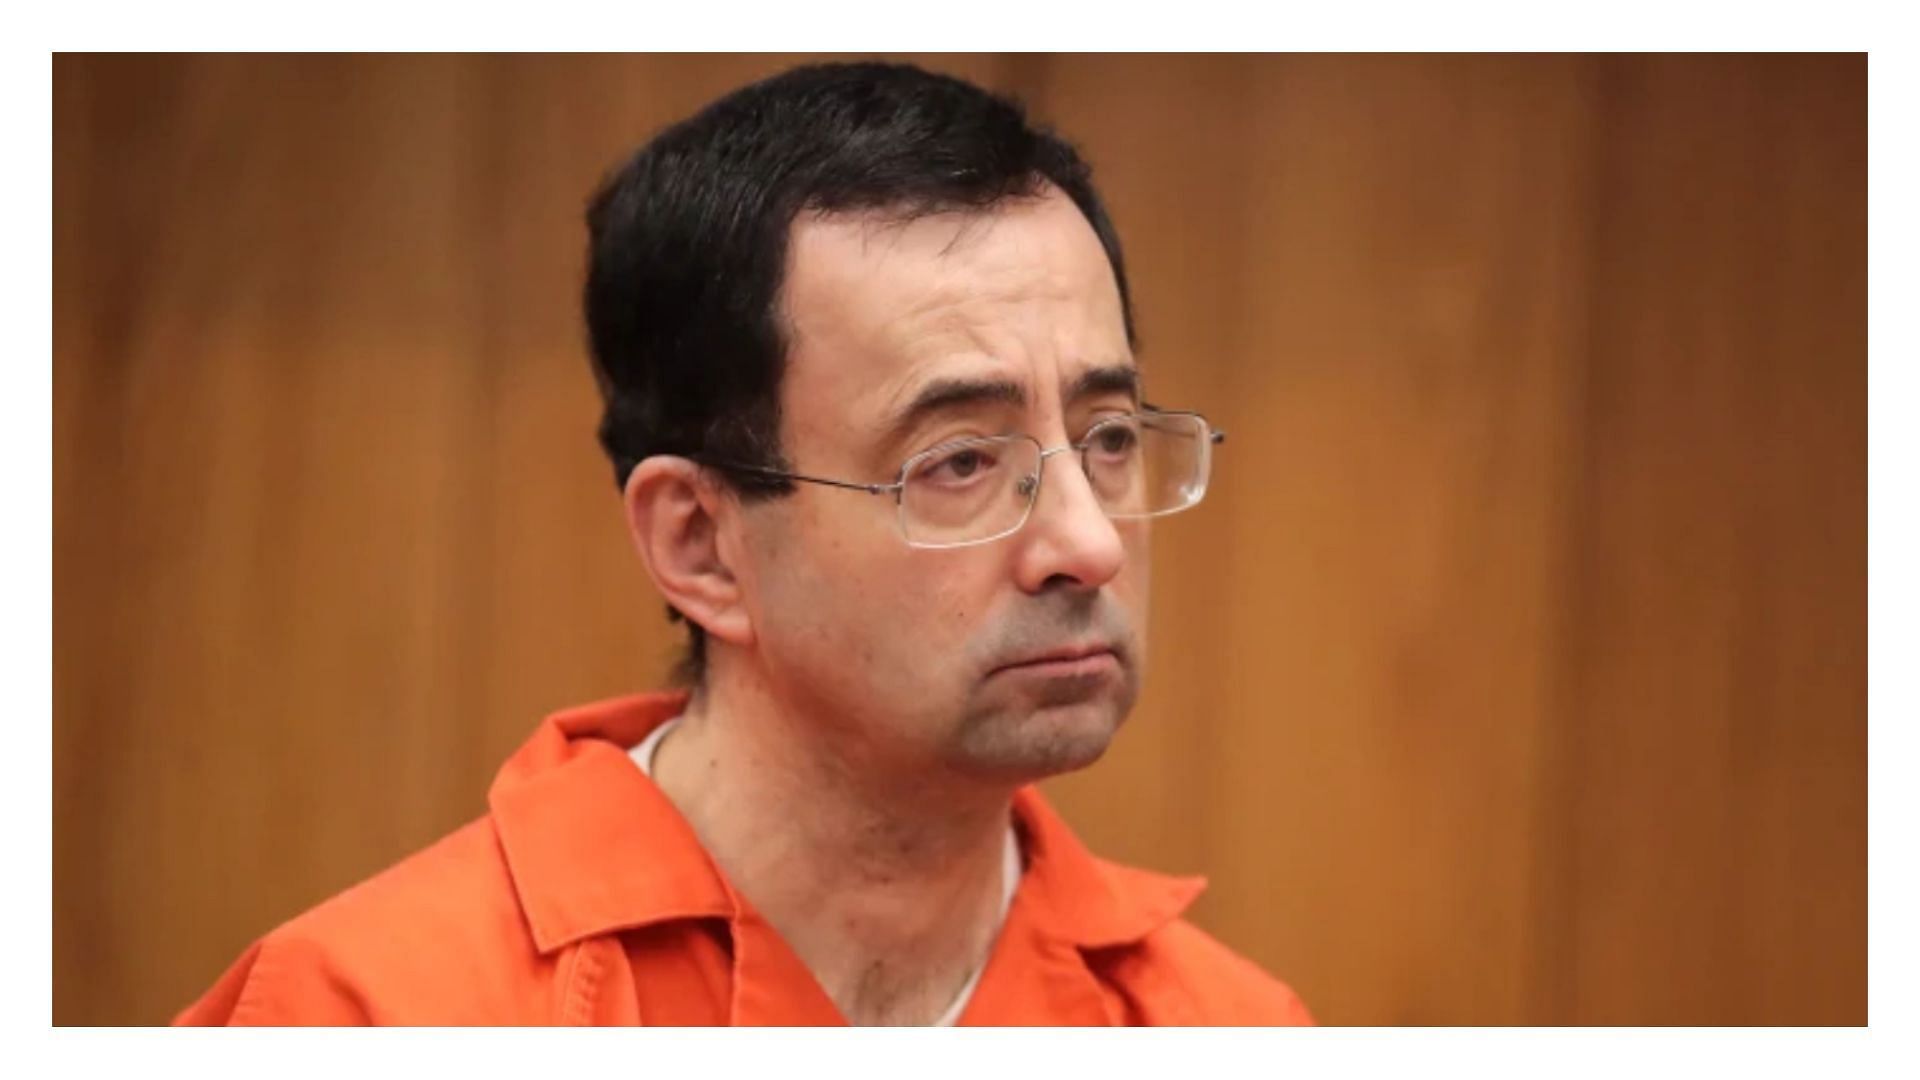 Victims of Larry Nassar are suing the FBI for allegedly mishandling the case (image via Jeff Kowalsky/Getty)